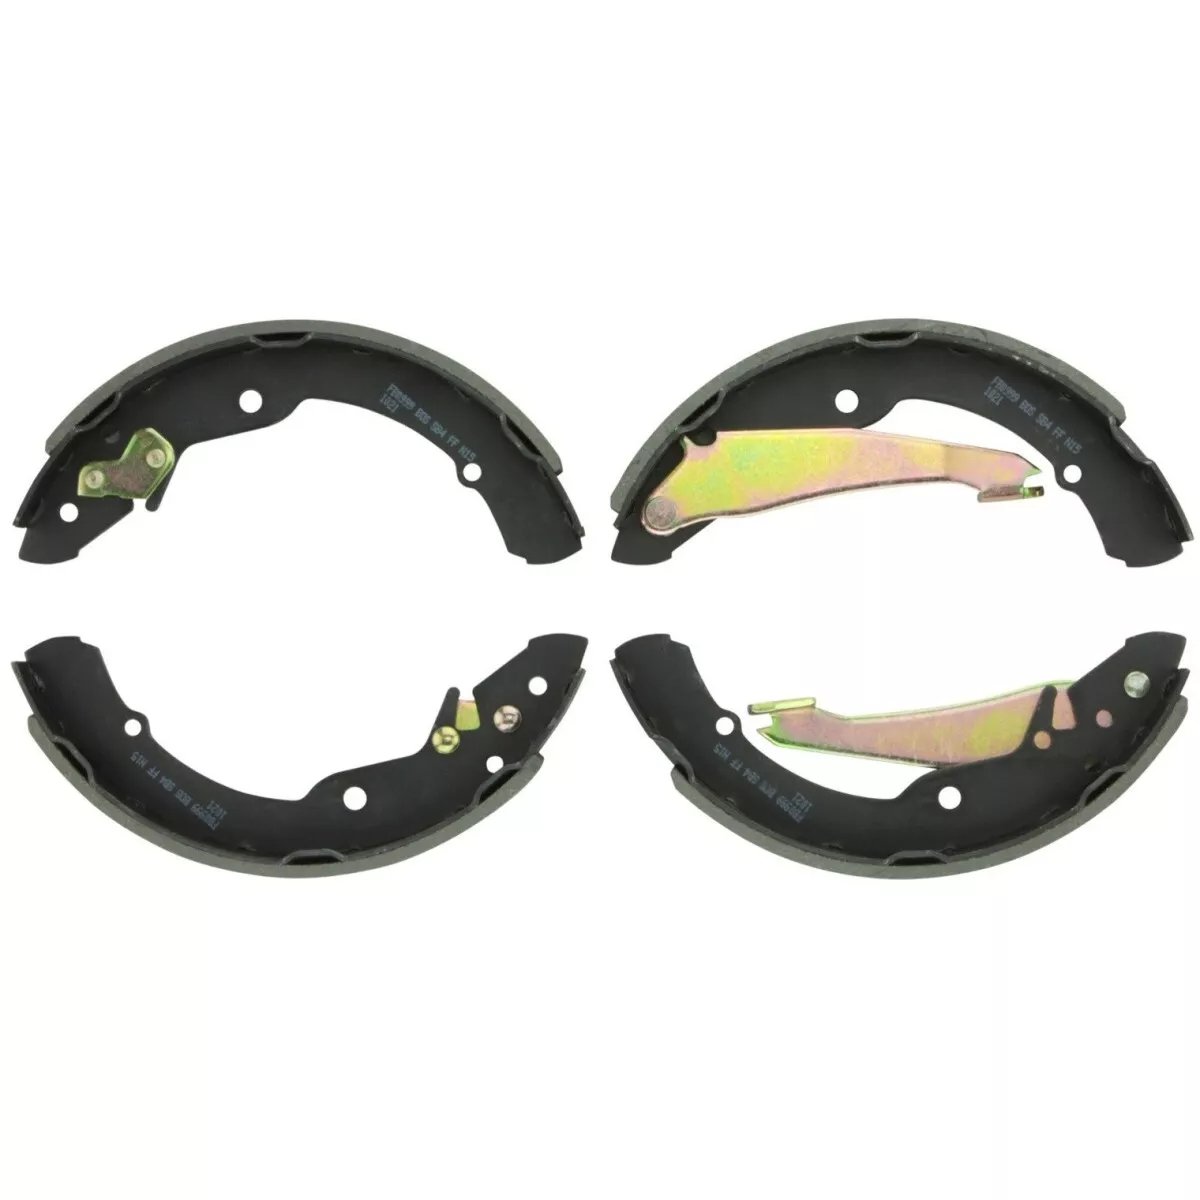 Picture of Bosch BS748 Rear   Brake Shoes for 2003 Mazda MPV